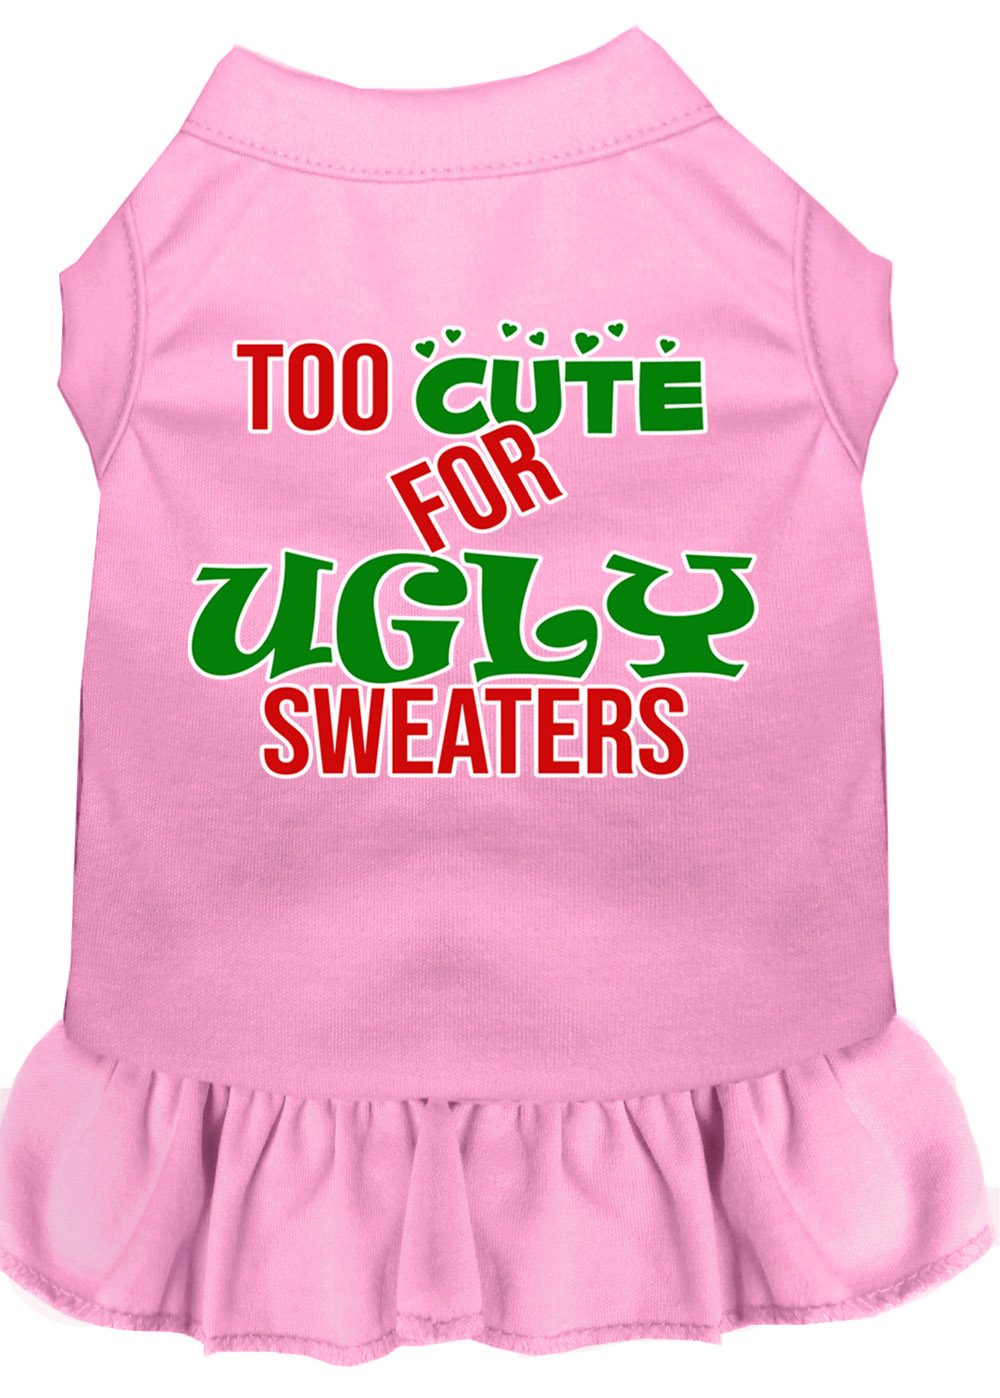 Too Cute for Ugly Sweaters Screen Print Dog Dress Light Pink Med